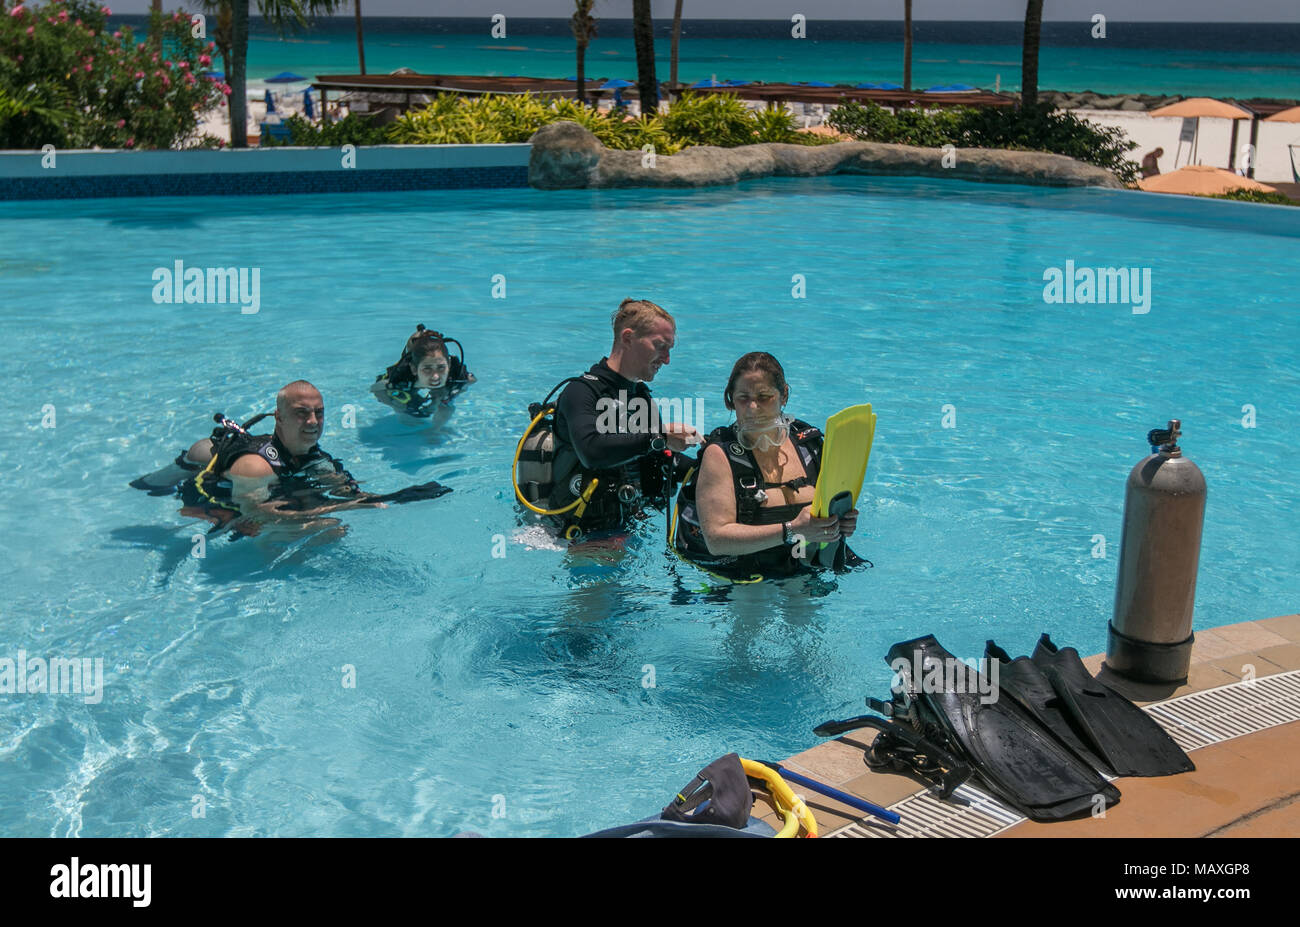 Bridgetown, Barbados, March 19, 2018: People are taking initial SCUBA lessons in a hotel pool. Stock Photo